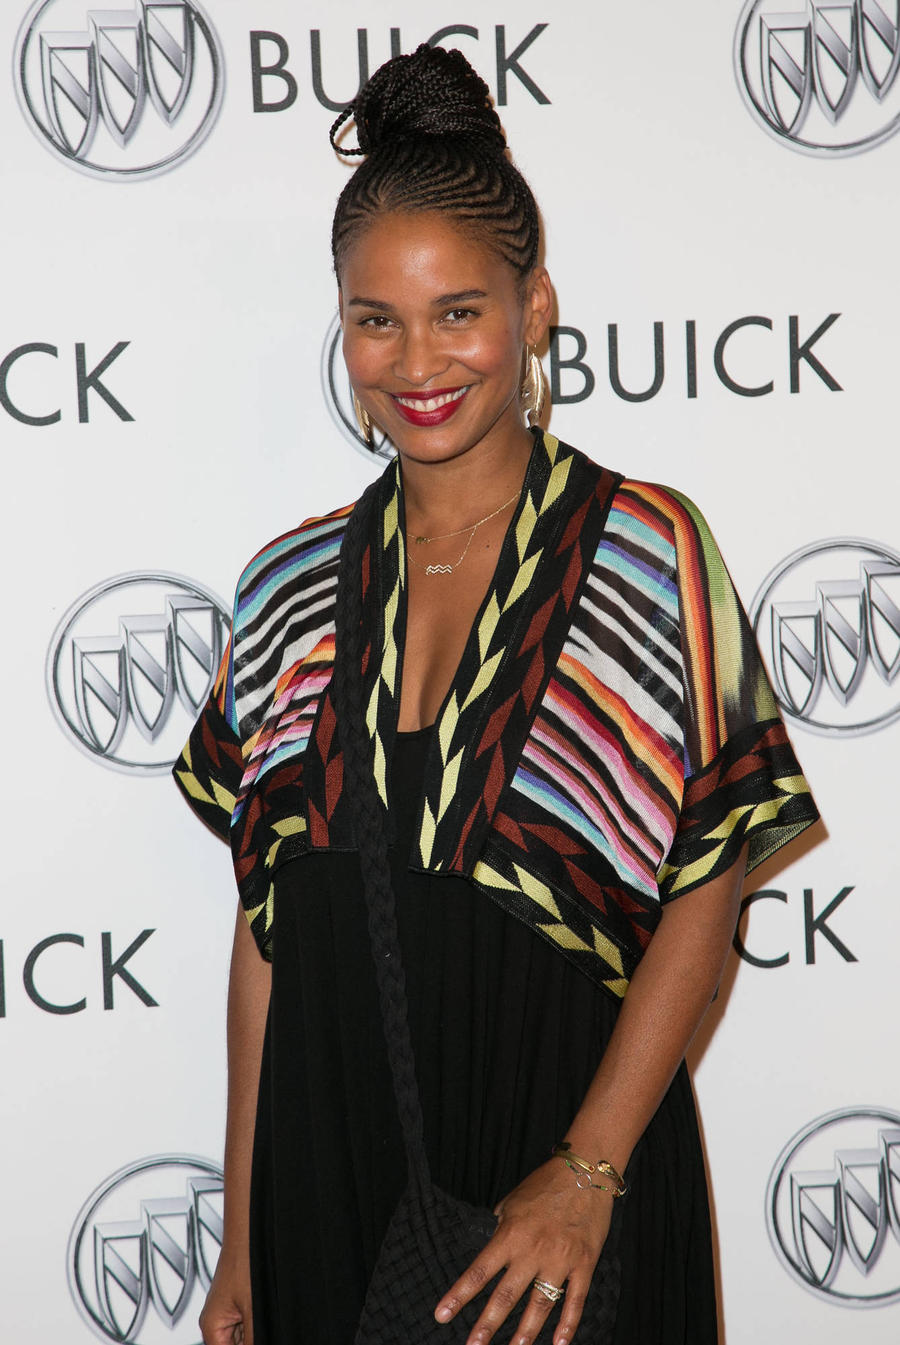 Latest Joy Bryant News and Archives | Contactmusic.com